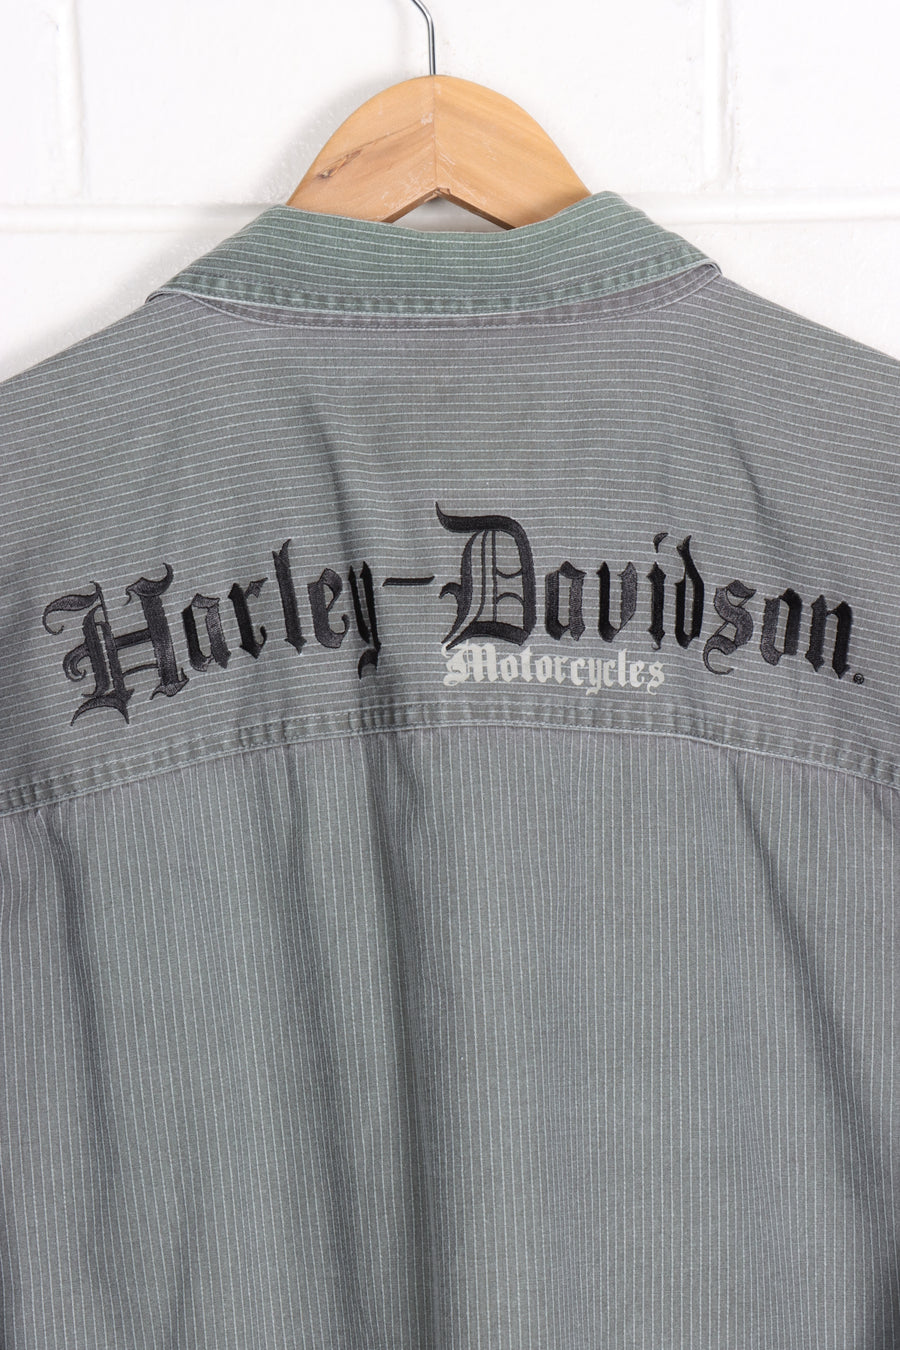 HARLEY DAVIDSON Embroidered Snap Button Green Striped Shirt (XL)